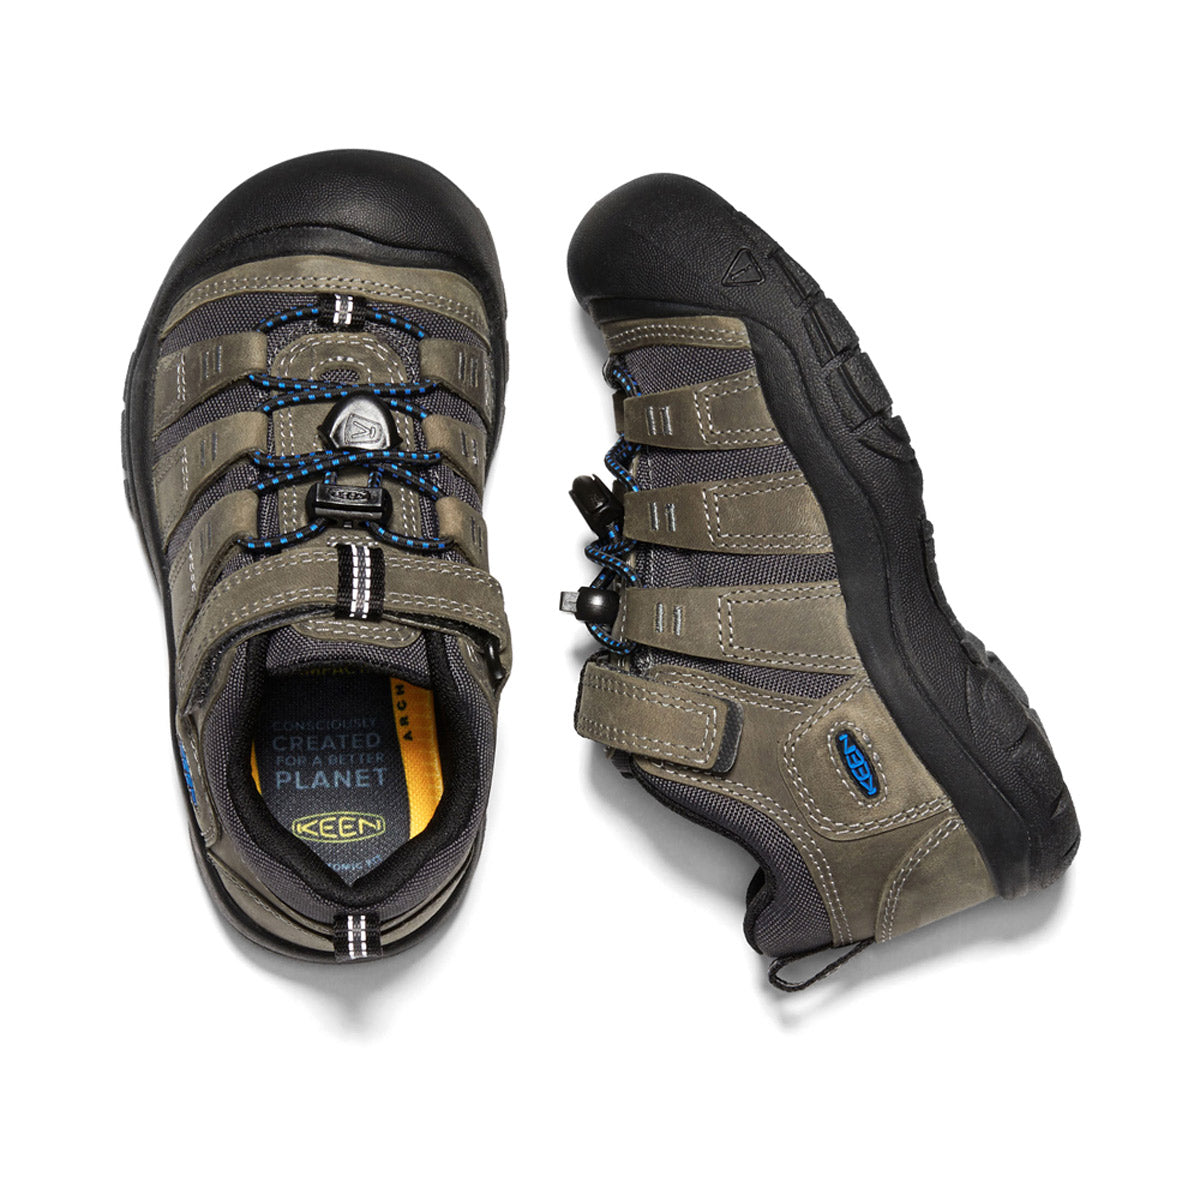 A pair of Keen Newport hiking shoes displayed from a top-down perspective, featuring a breathable mesh lining.